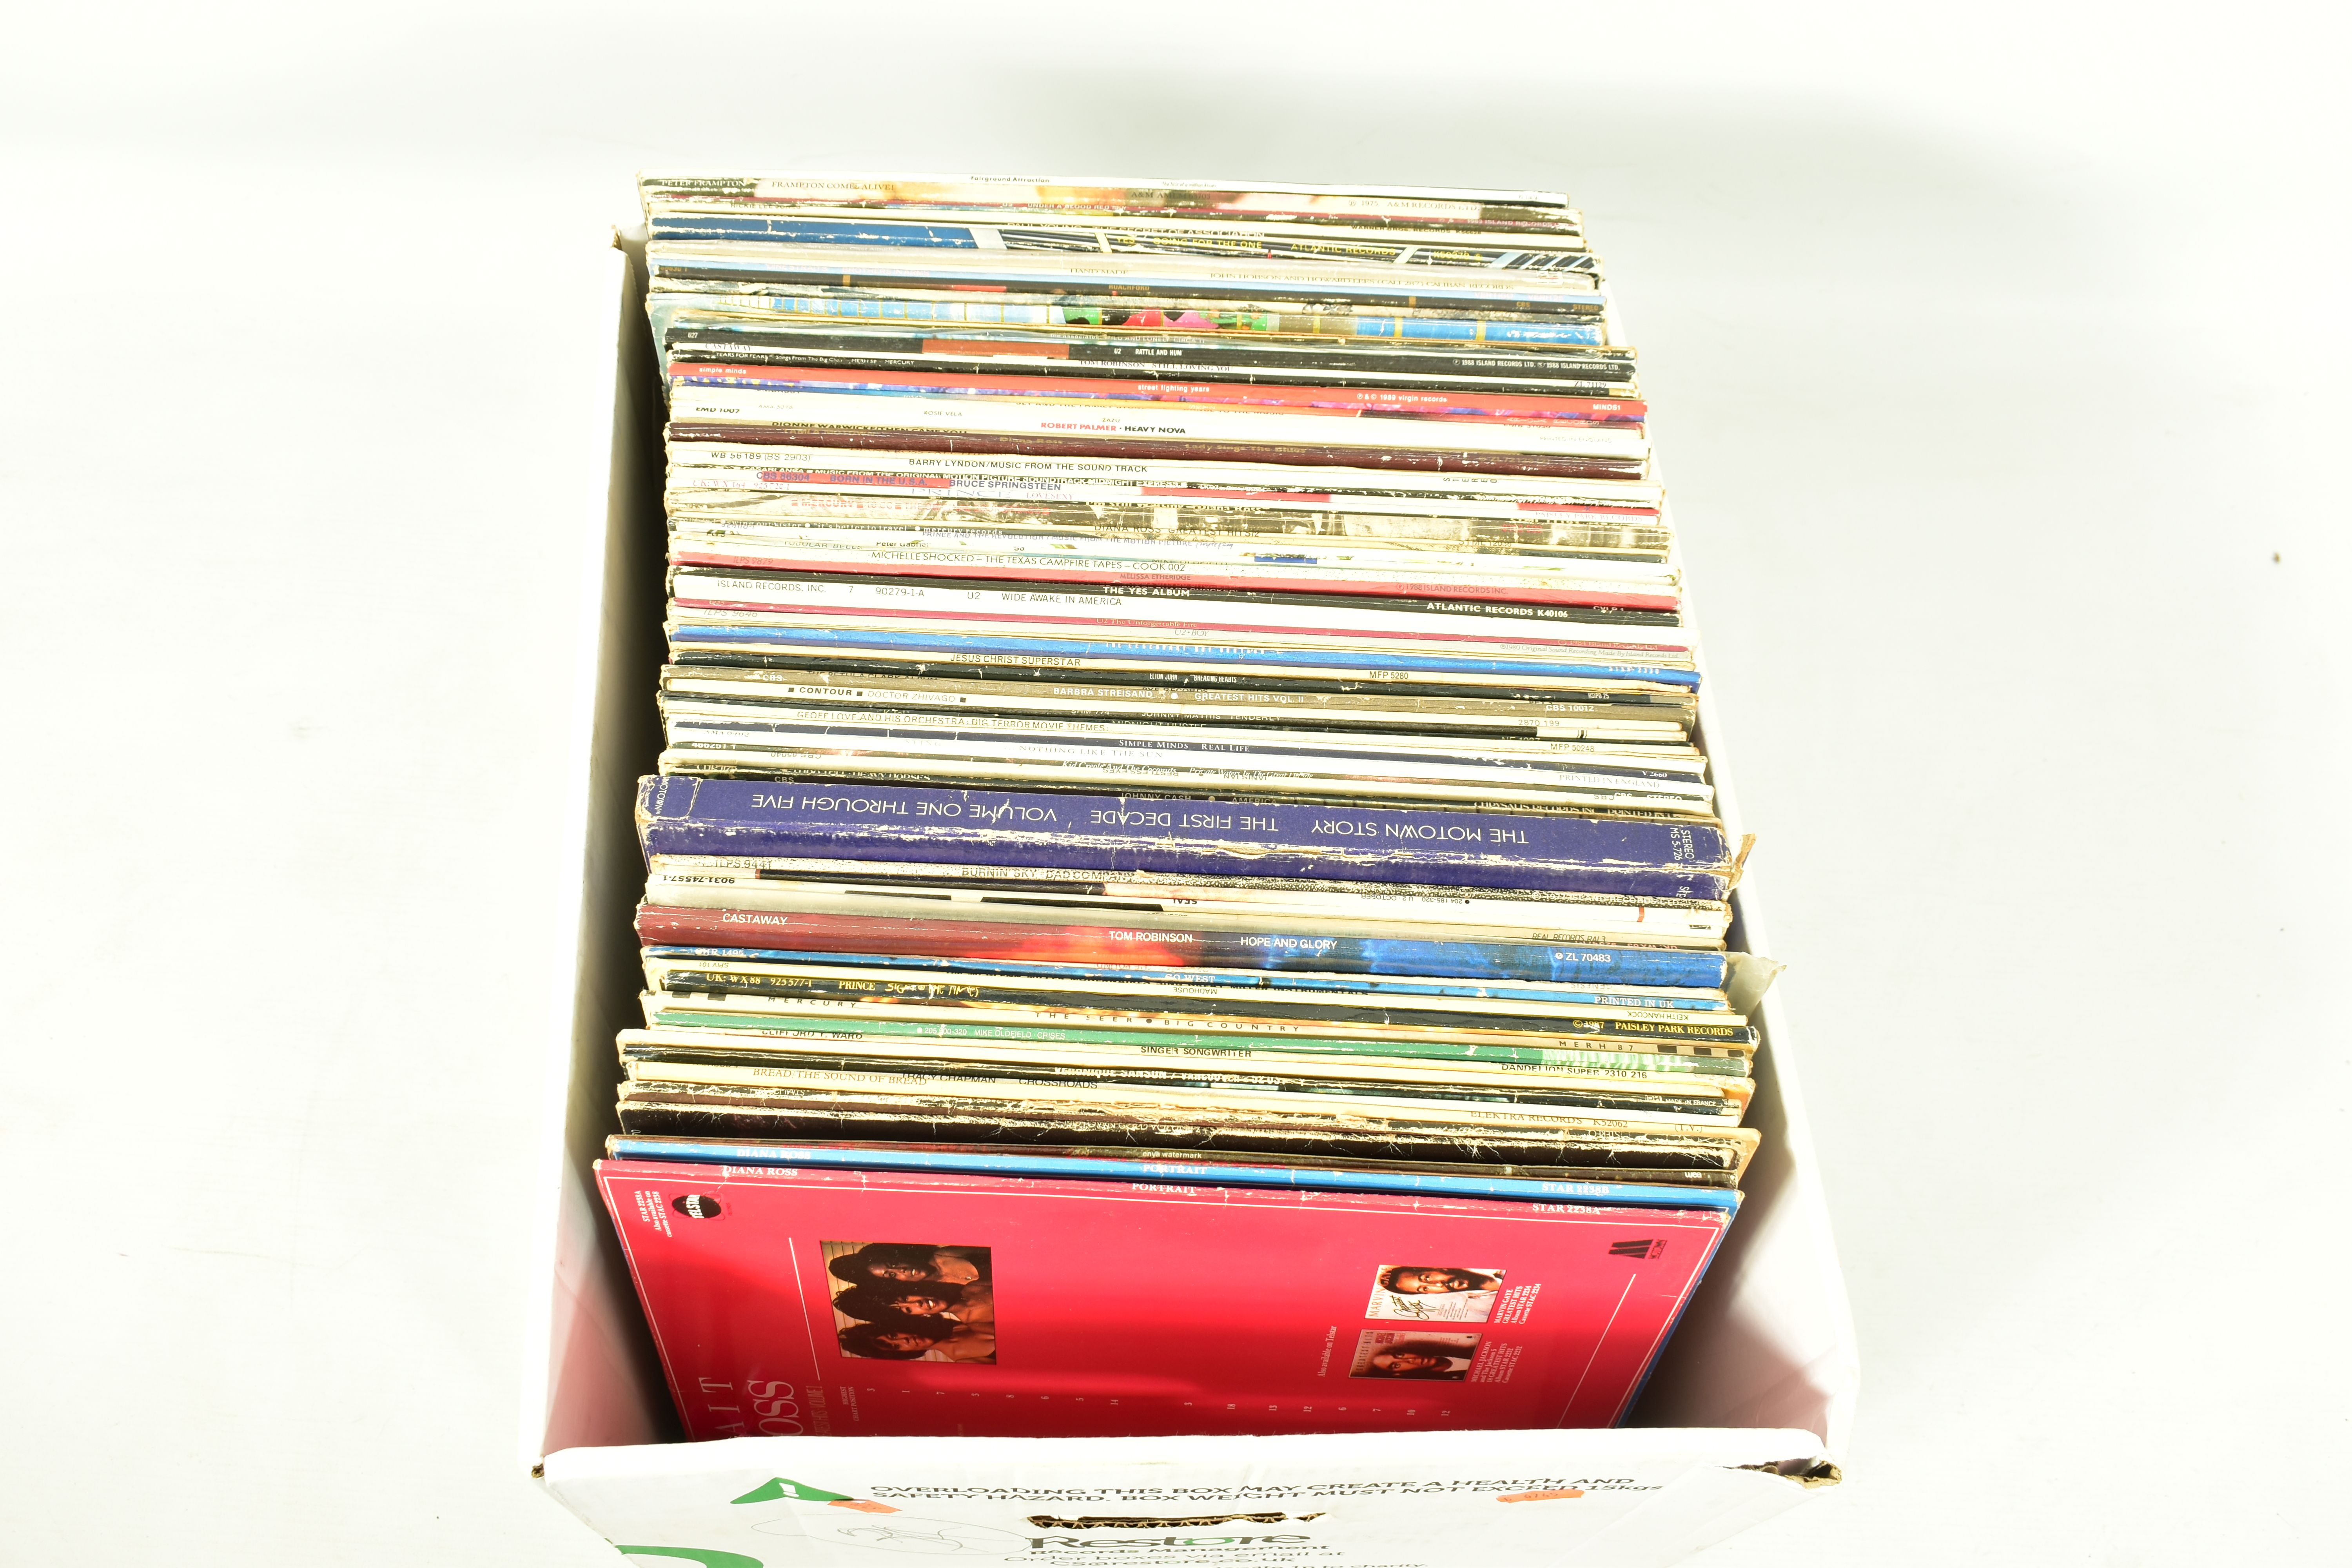 A TRAY CONTAINING APPROX NINETY FIVE LPs AND 12in SINGLES by artists such as Yes, U2, Prince,Bad